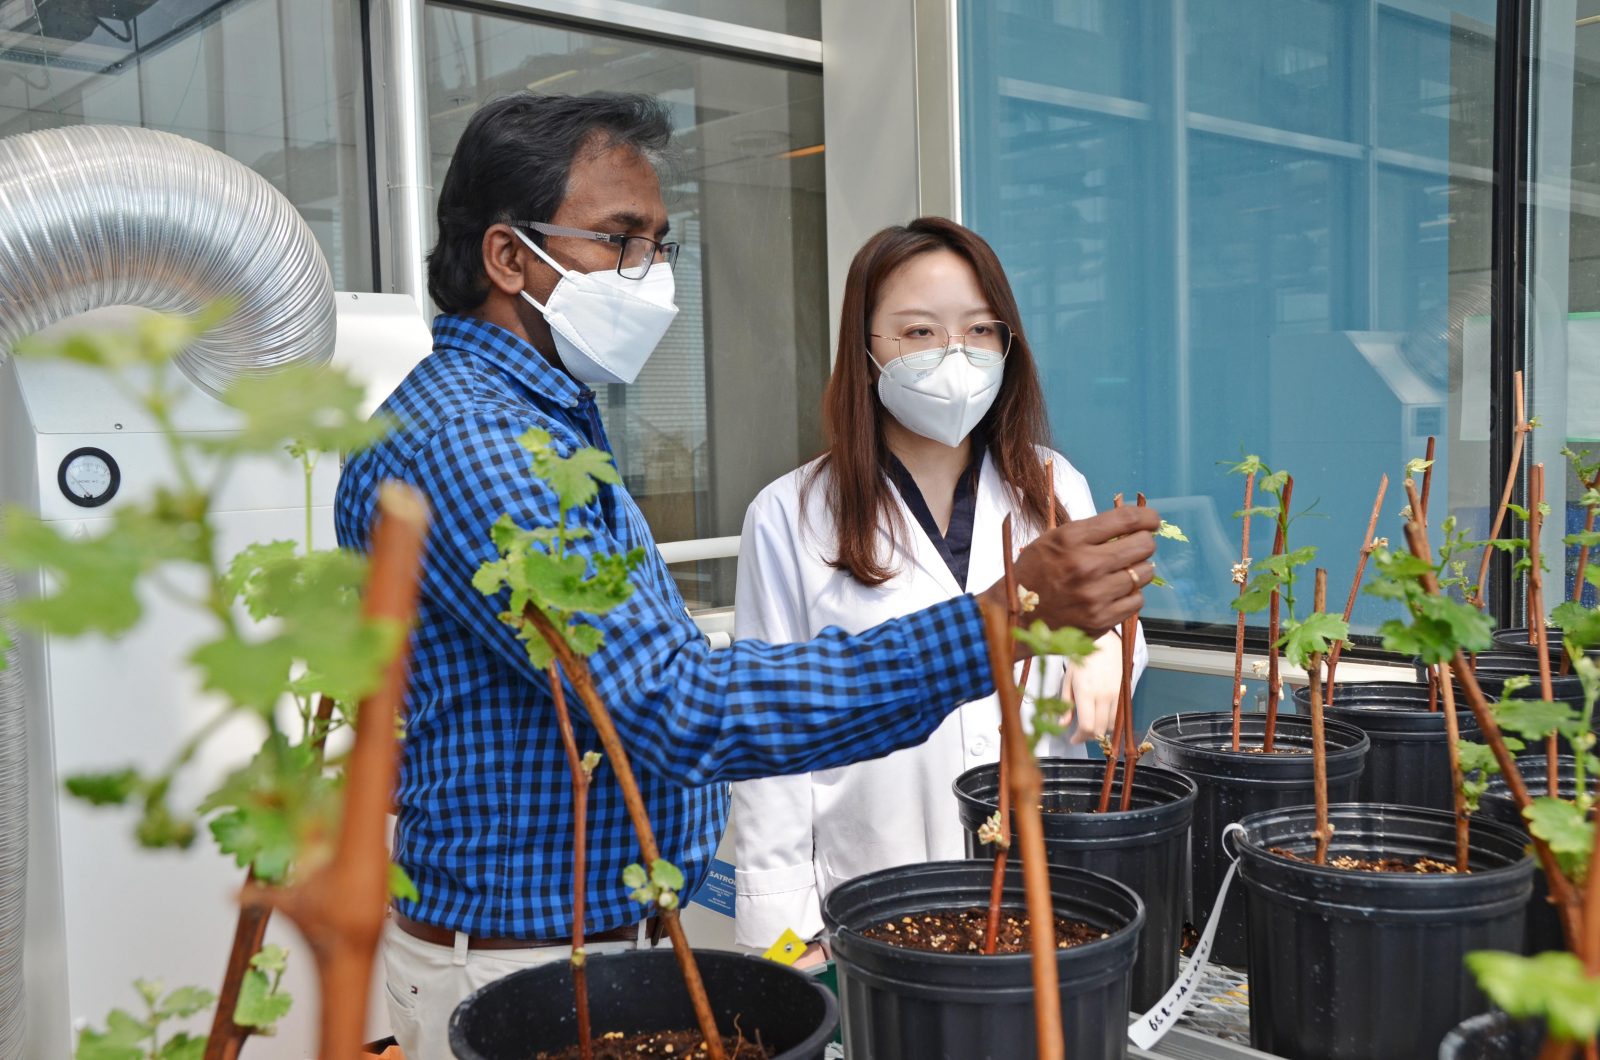 A man with a mask and glasses and wearing a black-and-blue checkered shirt and white pants grasps onto the top of a plant among a group of plants in the foreground while a woman to his right wearing glasses, a white lab coat and a black shirt looks on.